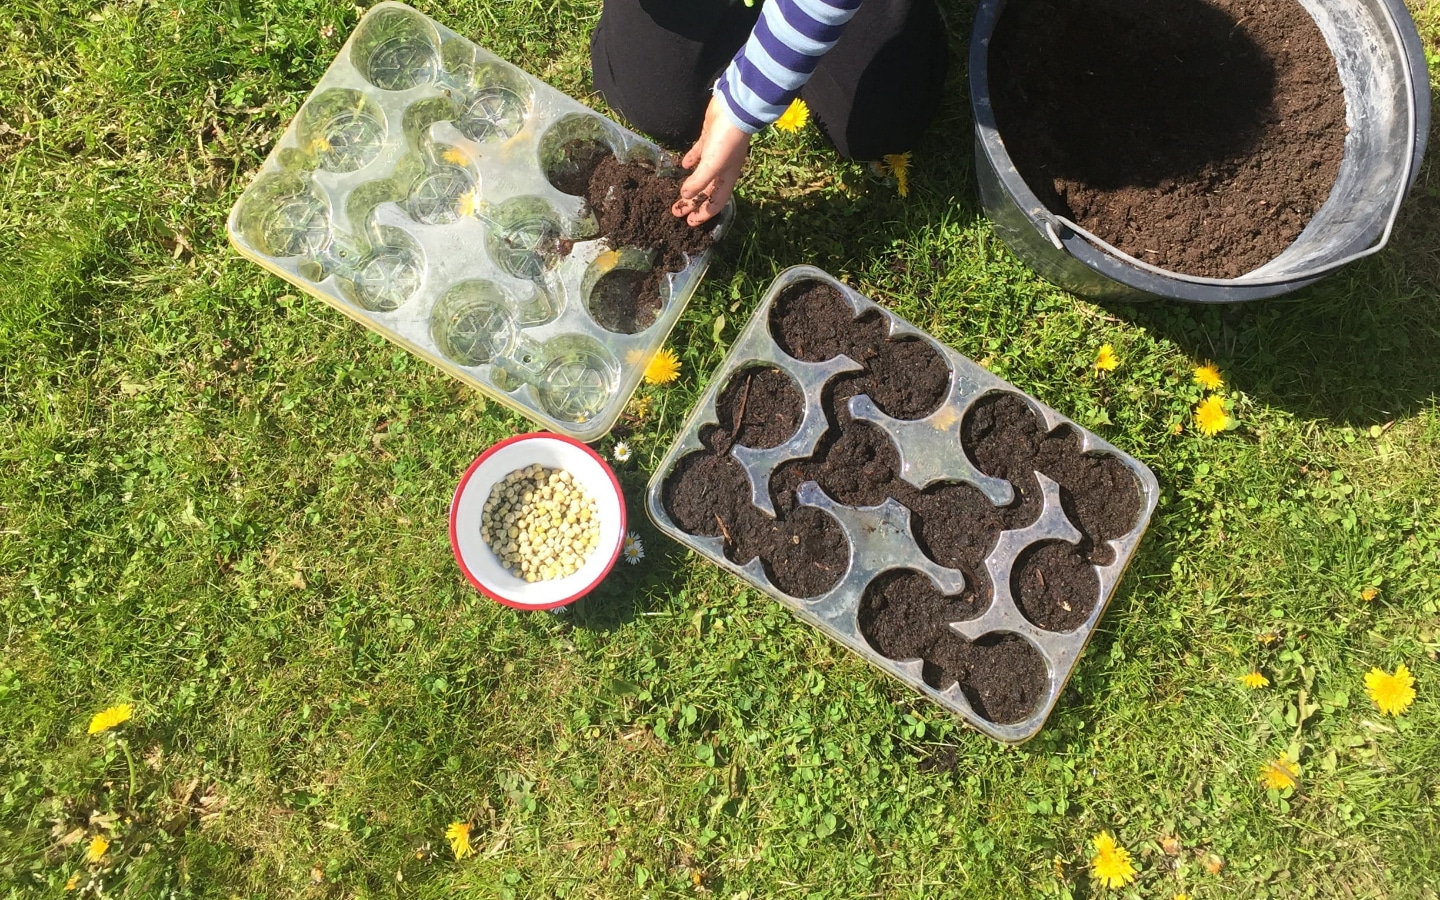 7 Fast Growing Seeds for Kids to Enjoy Learning